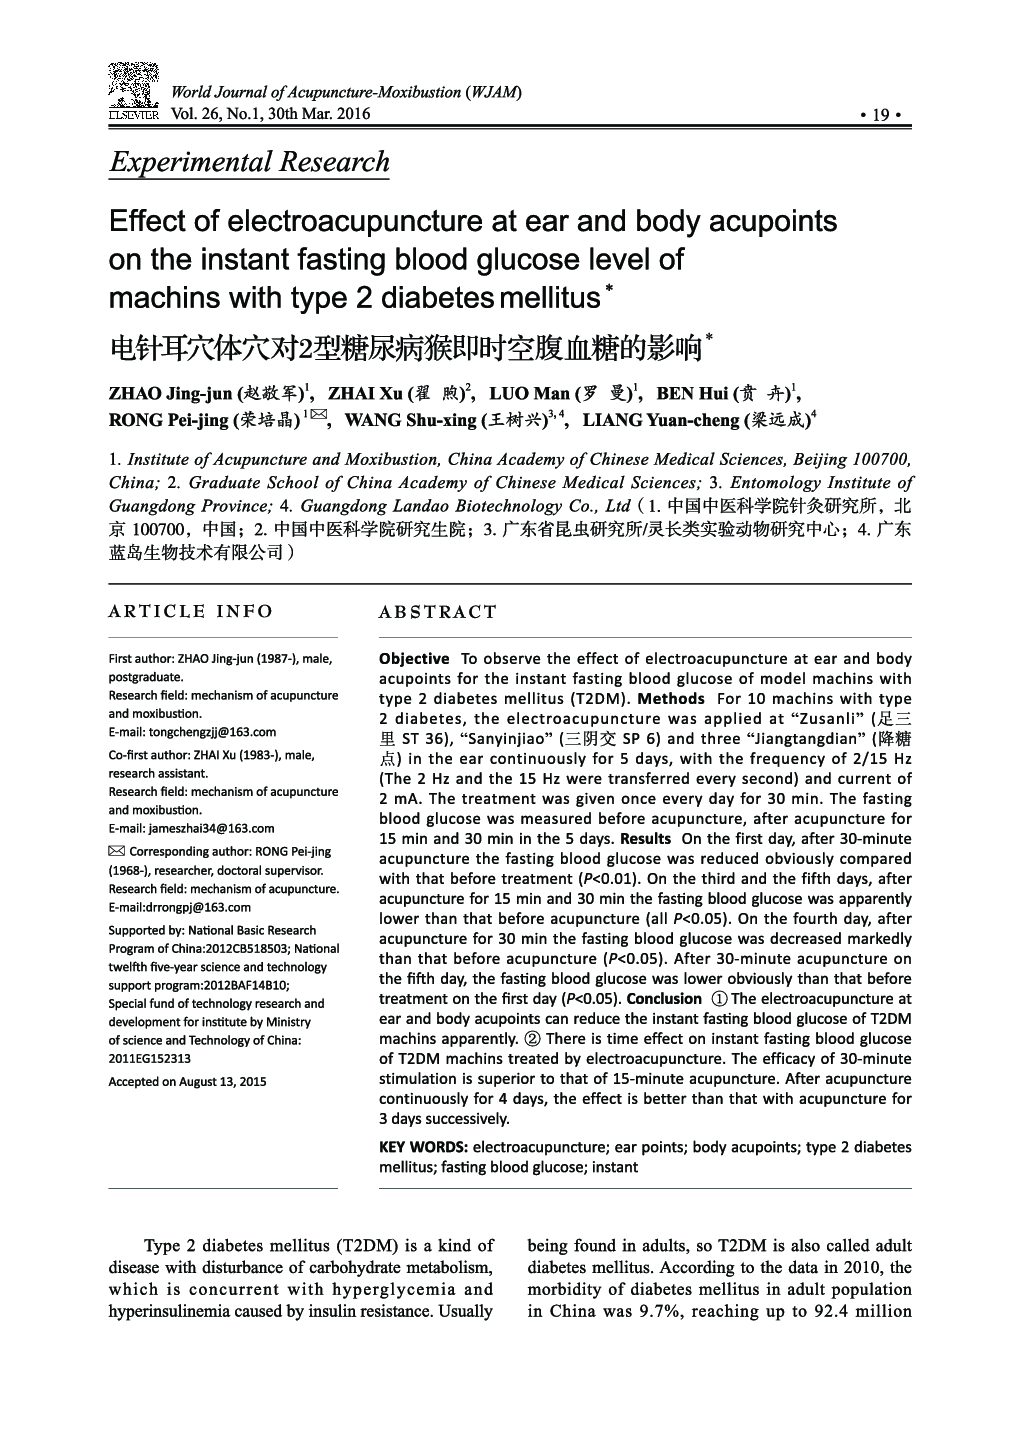 Effect of electroacupuncture at ear and body acupoints on the instant fasting blood glucose level of machins with type 2 diabetes mellitus